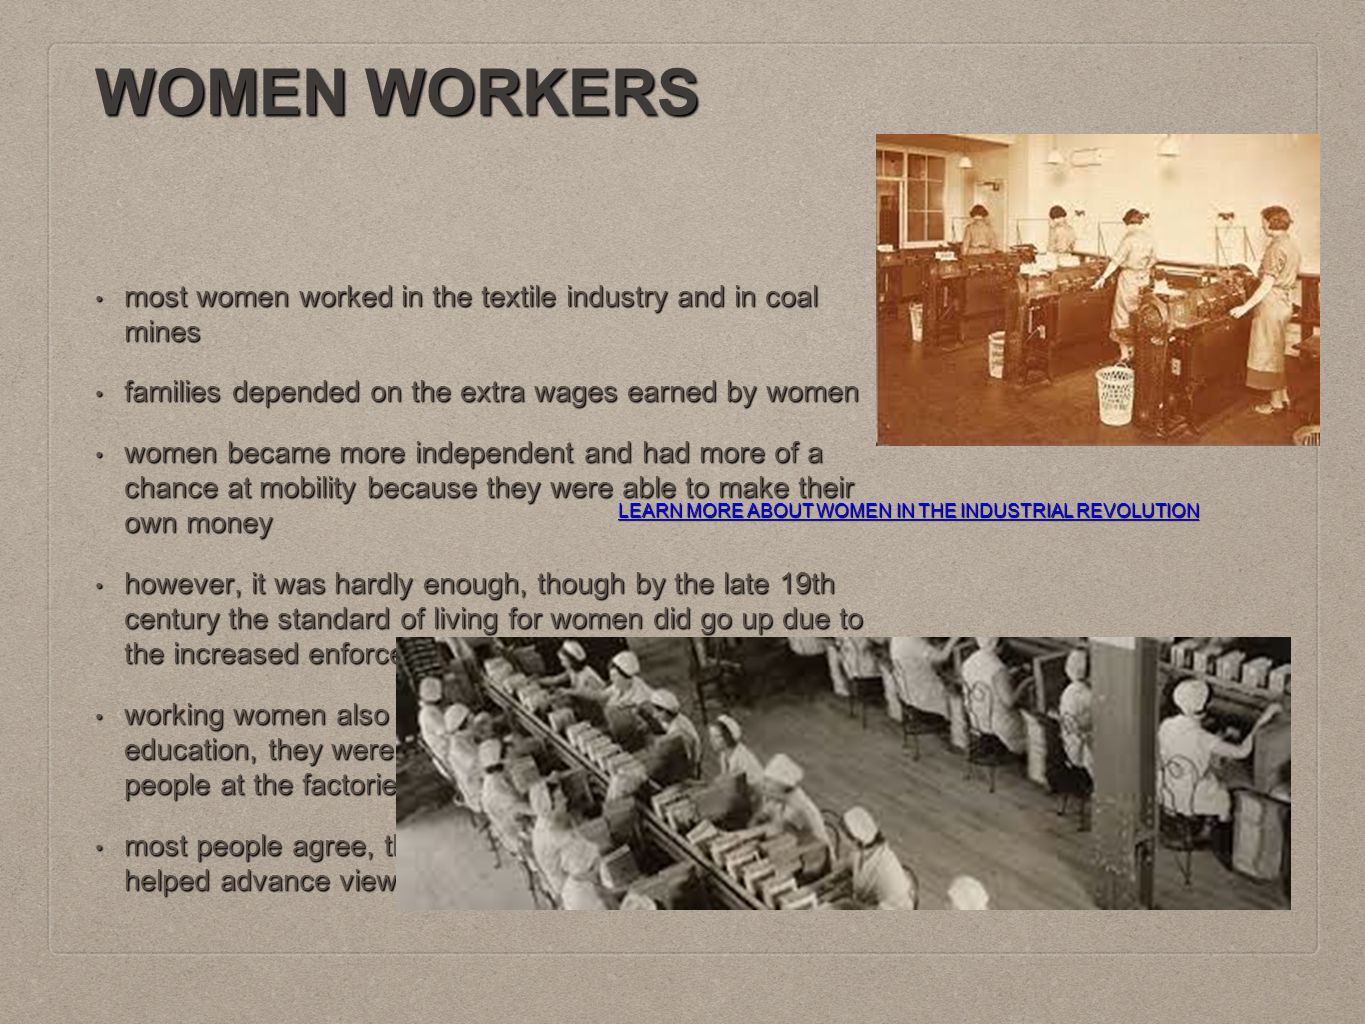 WOMEN WORKERS most women worked in the textile industry and in coal mines most women worked in the textile industry and in coal mines families depended on the extra wages earned by women families depended on the extra wages earned by women women became more independent and had more of a chance at mobility because they were able to make their own money women became more independent and had more of a chance at mobility because they were able to make their own money however, it was hardly enough, though by the late 19th century the standard of living for women did go up due to the increased enforcement of Labor Laws however, it was hardly enough, though by the late 19th century the standard of living for women did go up due to the increased enforcement of Labor Laws working women also did not have access to an extended education, they were taught through churches or through people at the factories they worked at working women also did not have access to an extended education, they were taught through churches or through people at the factories they worked at most people agree, though, that the Industrial Revolution helped advance views towards women in the long run most people agree, though, that the Industrial Revolution helped advance views towards women in the long run LEARN MORE ABOUT WOMEN IN THE INDUSTRIAL REVOLUTION LEARN MORE ABOUT WOMEN IN THE INDUSTRIAL REVOLUTION